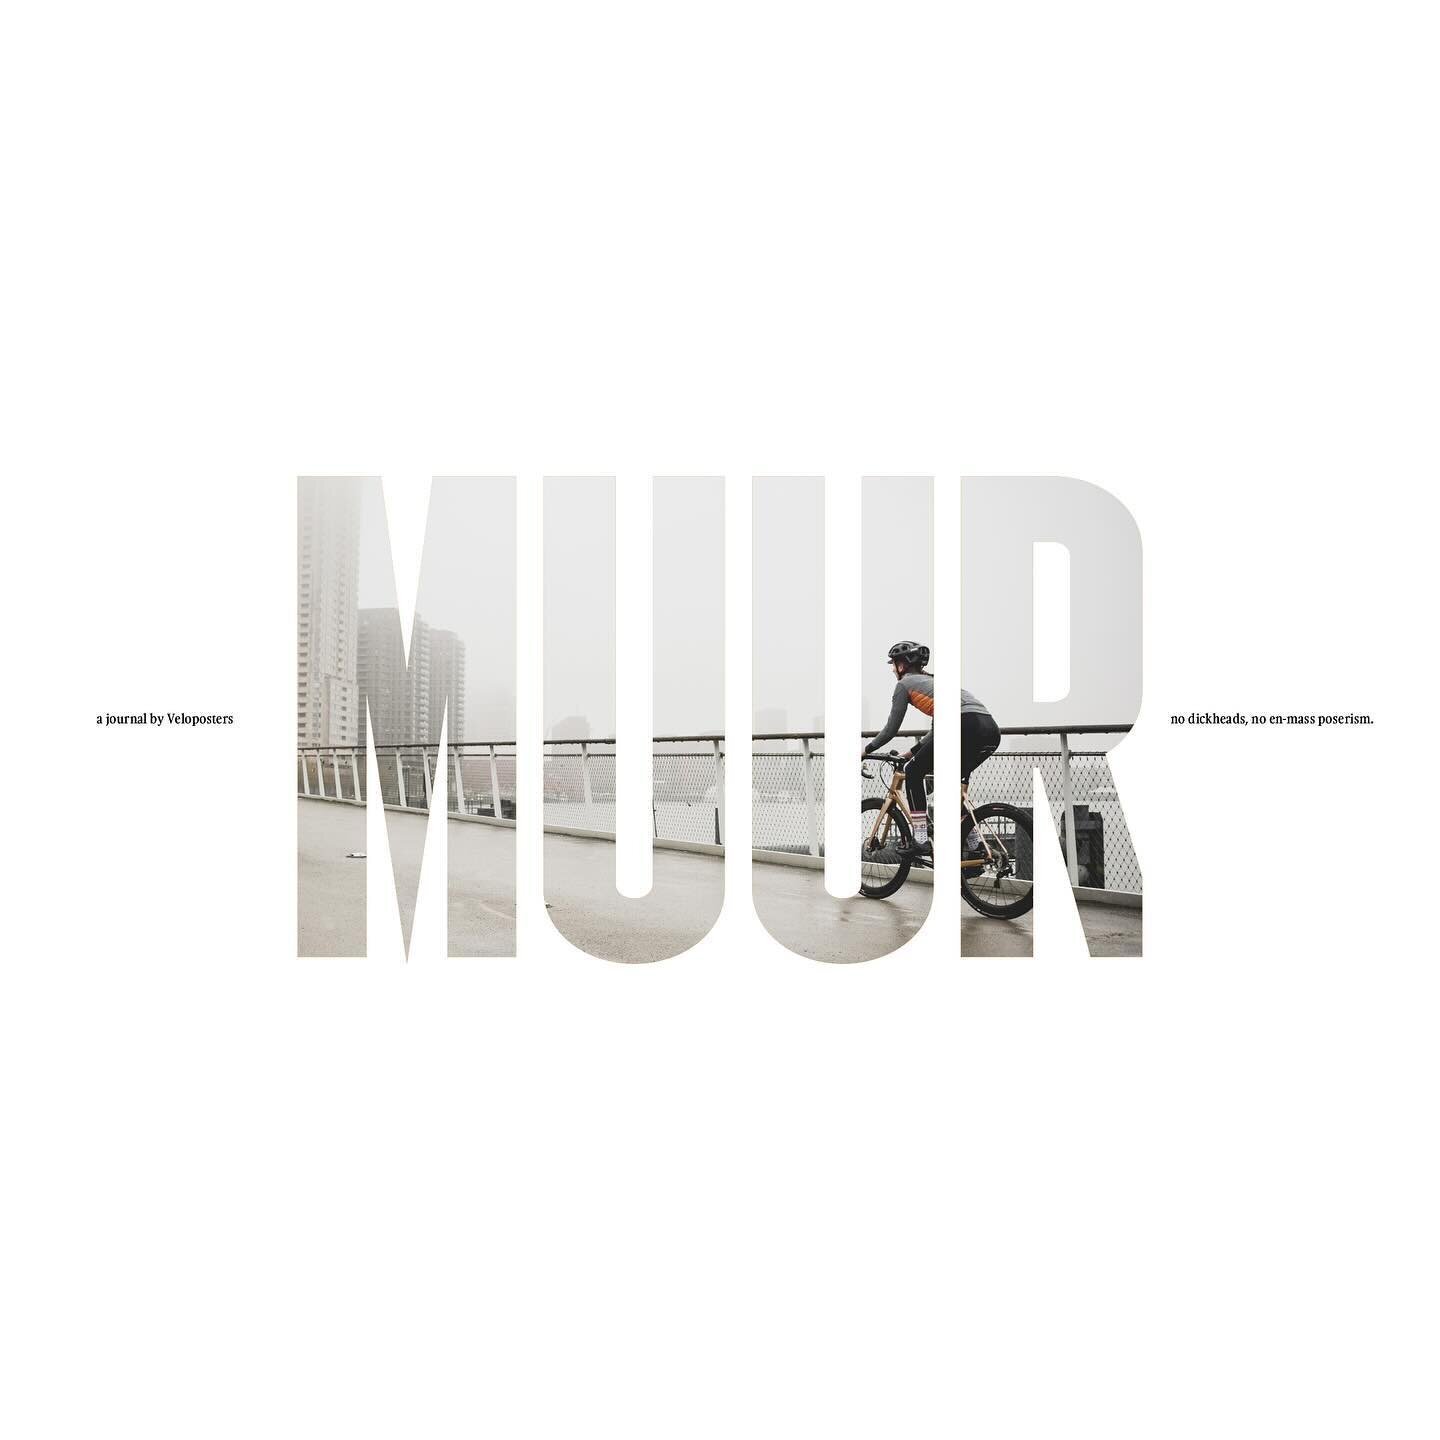 MUUR celebrates the joy of the journey and offers a curated collection of cycling inspired content for those who appreciate a quality cycling experience. Eclectic stories and images are interwoven with Veloposters unique prints and take on cycling.
A